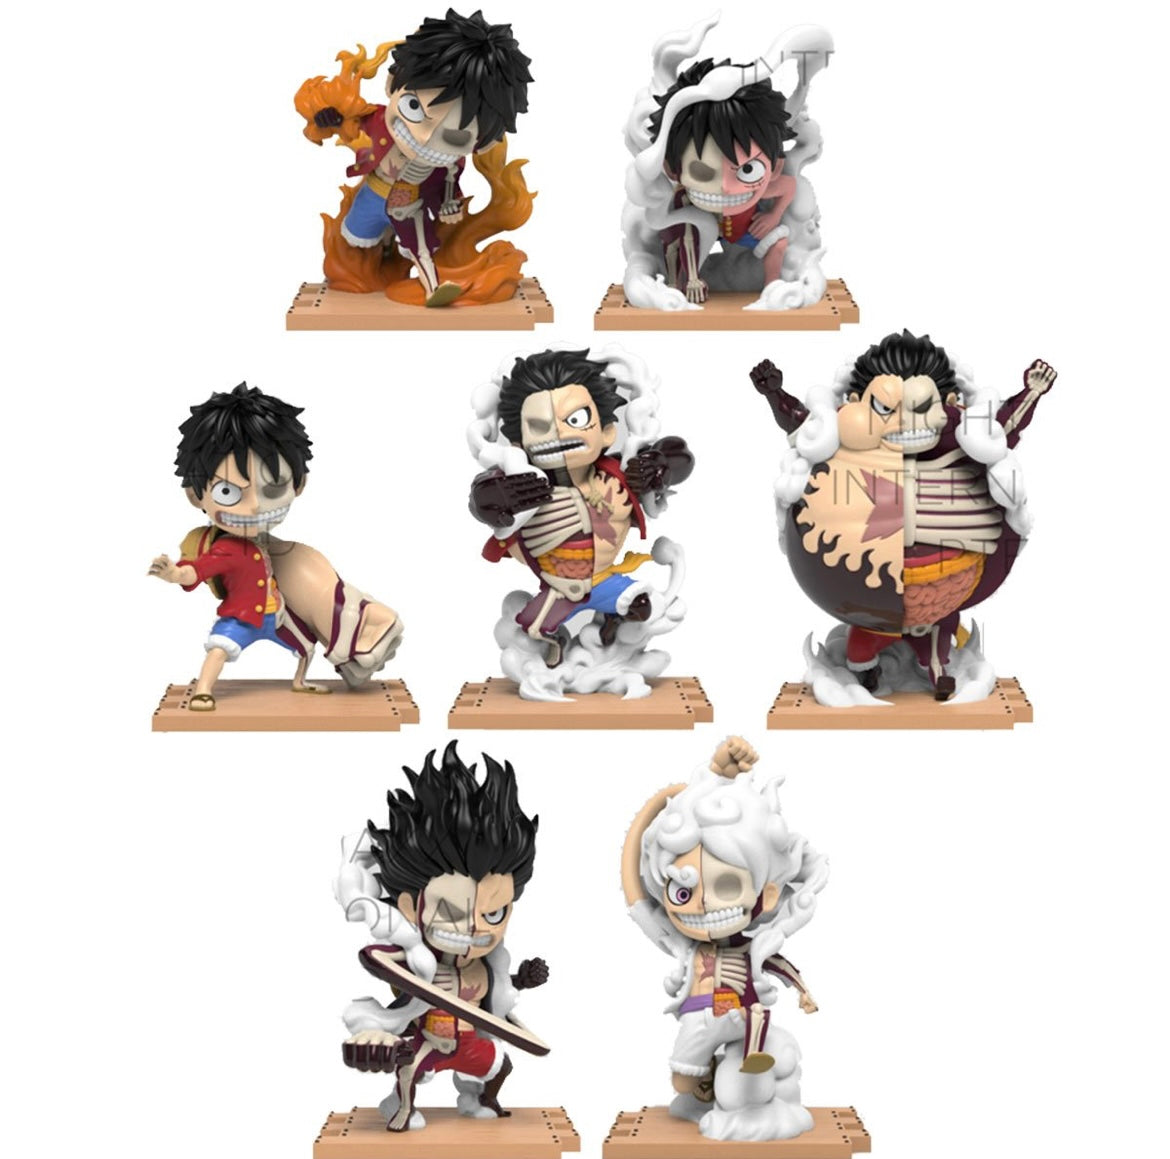 One Piece Freeny's Hidden Dissection Luffy's Gears Edition Blind Box Mini-figures (One Figure)